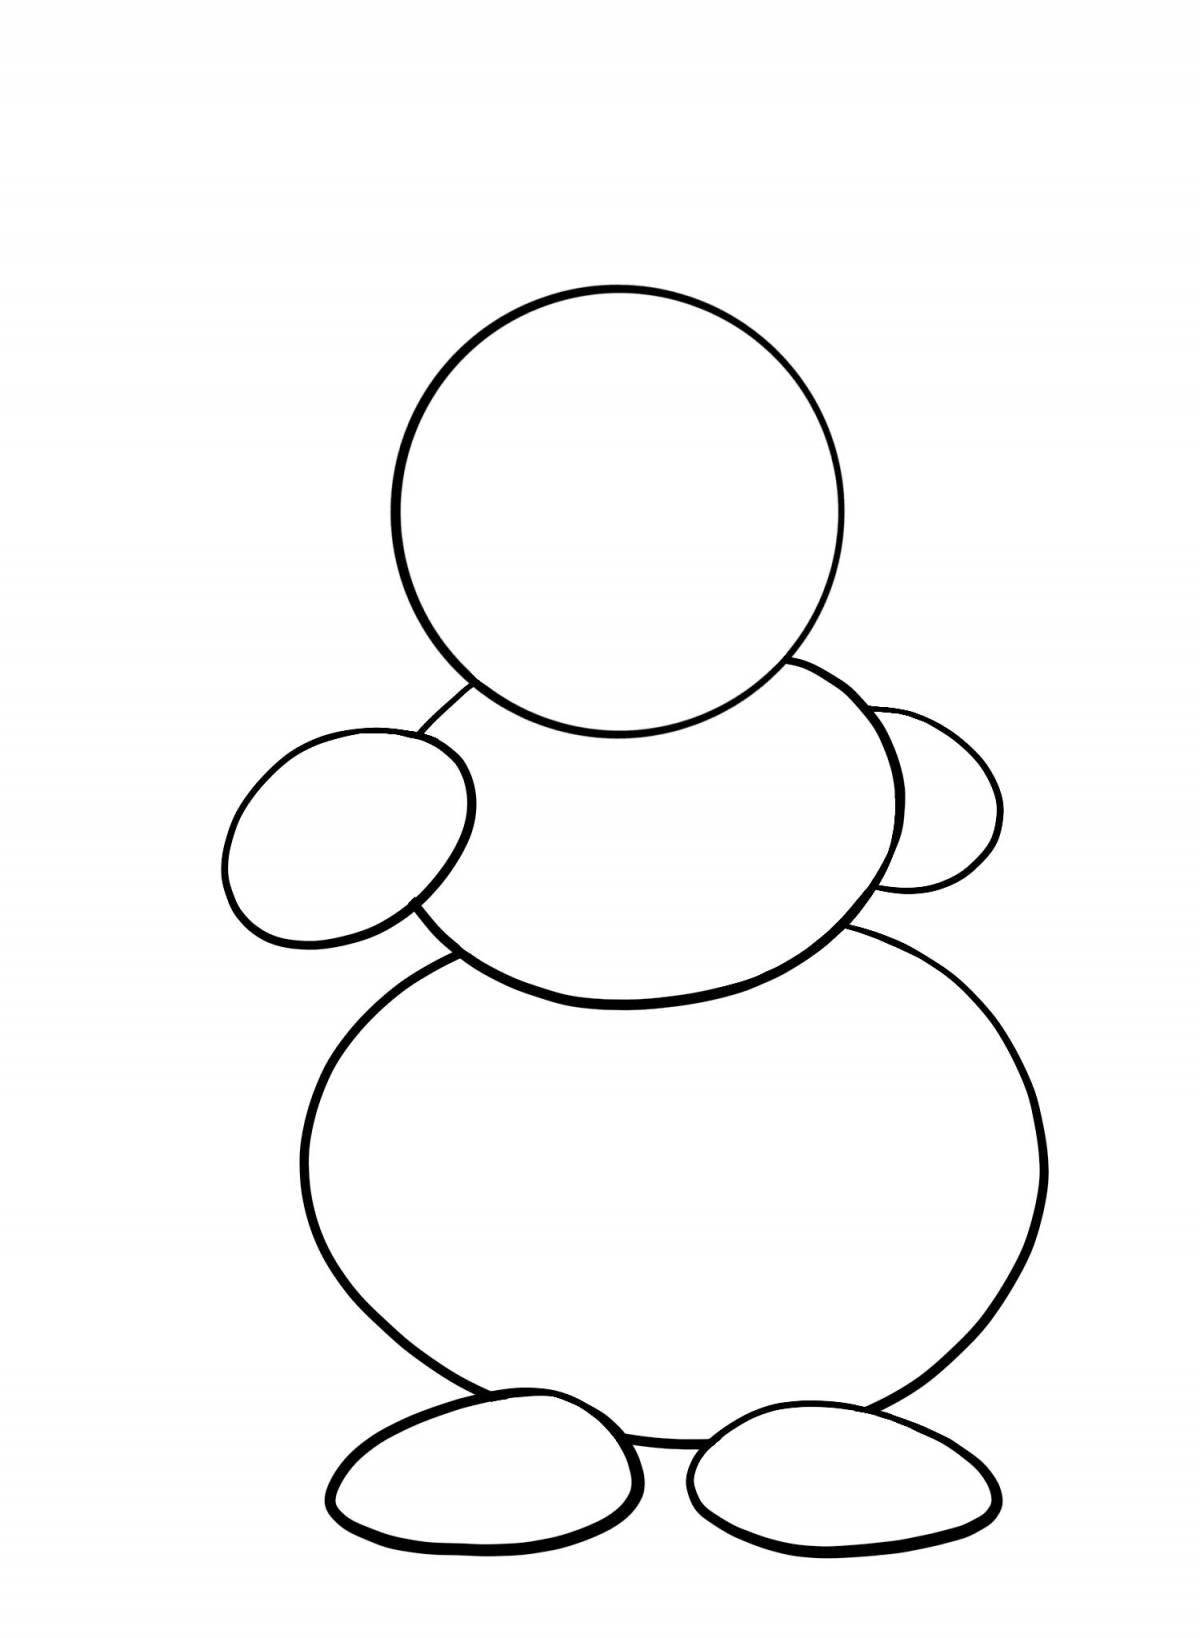 A fascinating snowman coloring book for children 2-3 years old